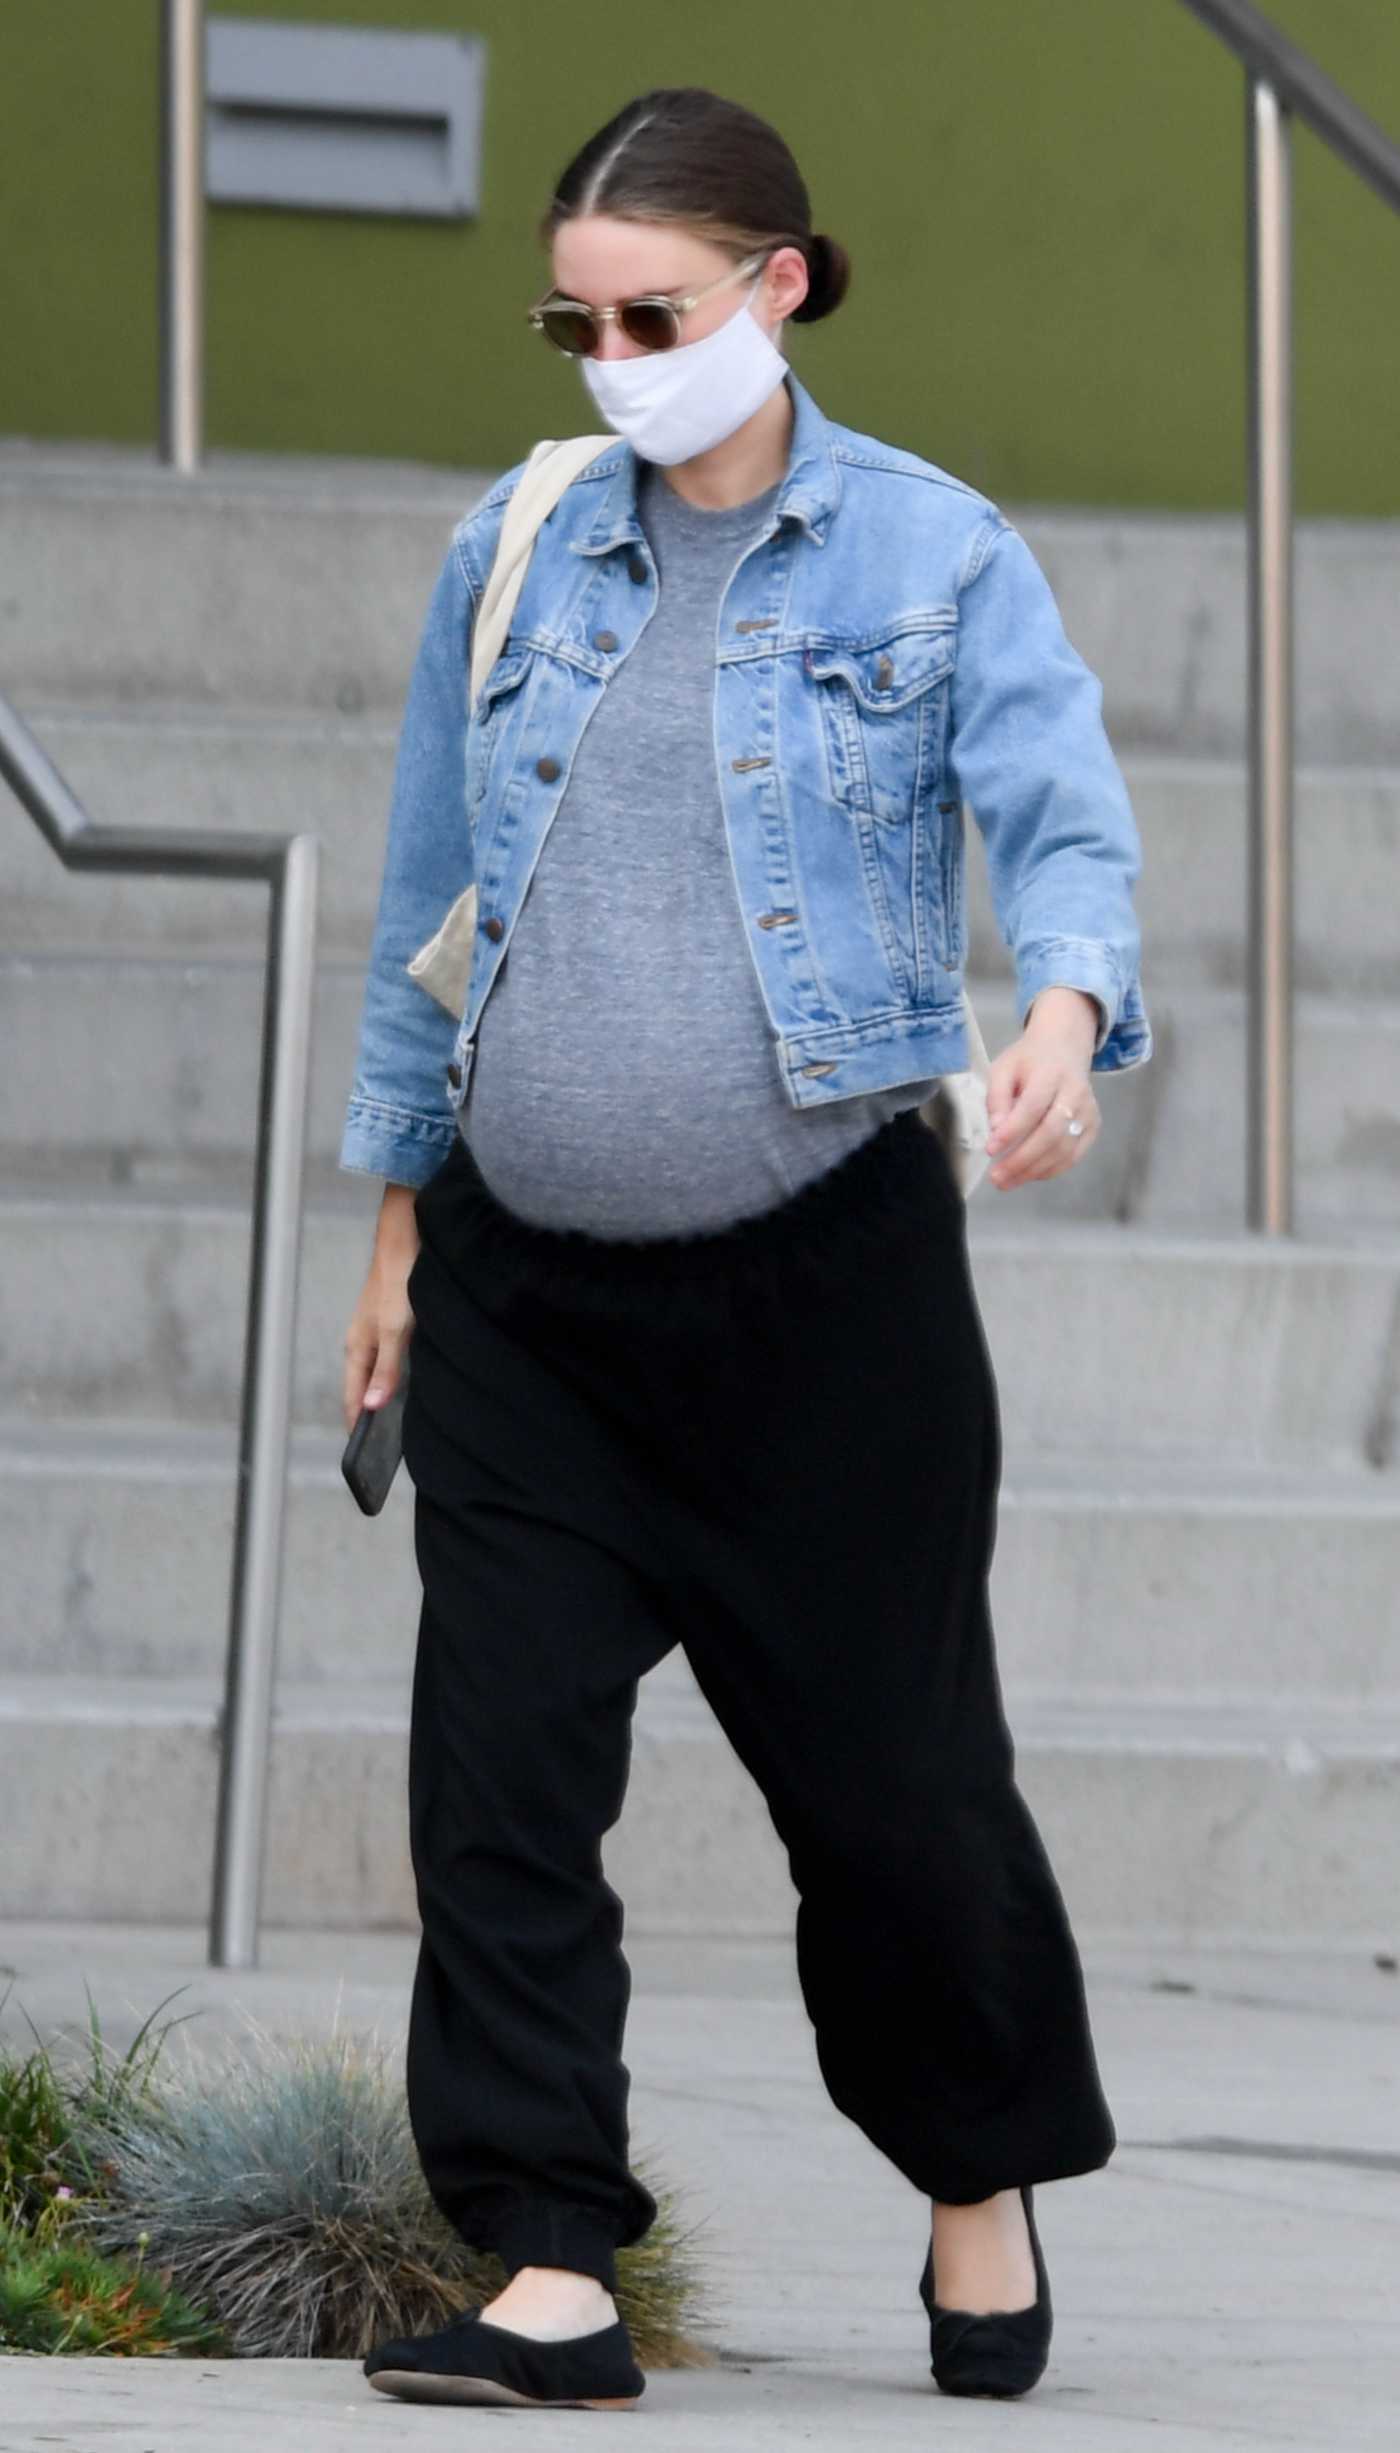 Rooney Mara in a Blue Denim Jacket Shows Her Growing Baby Bump Out in Los Angeles 08/17/2020